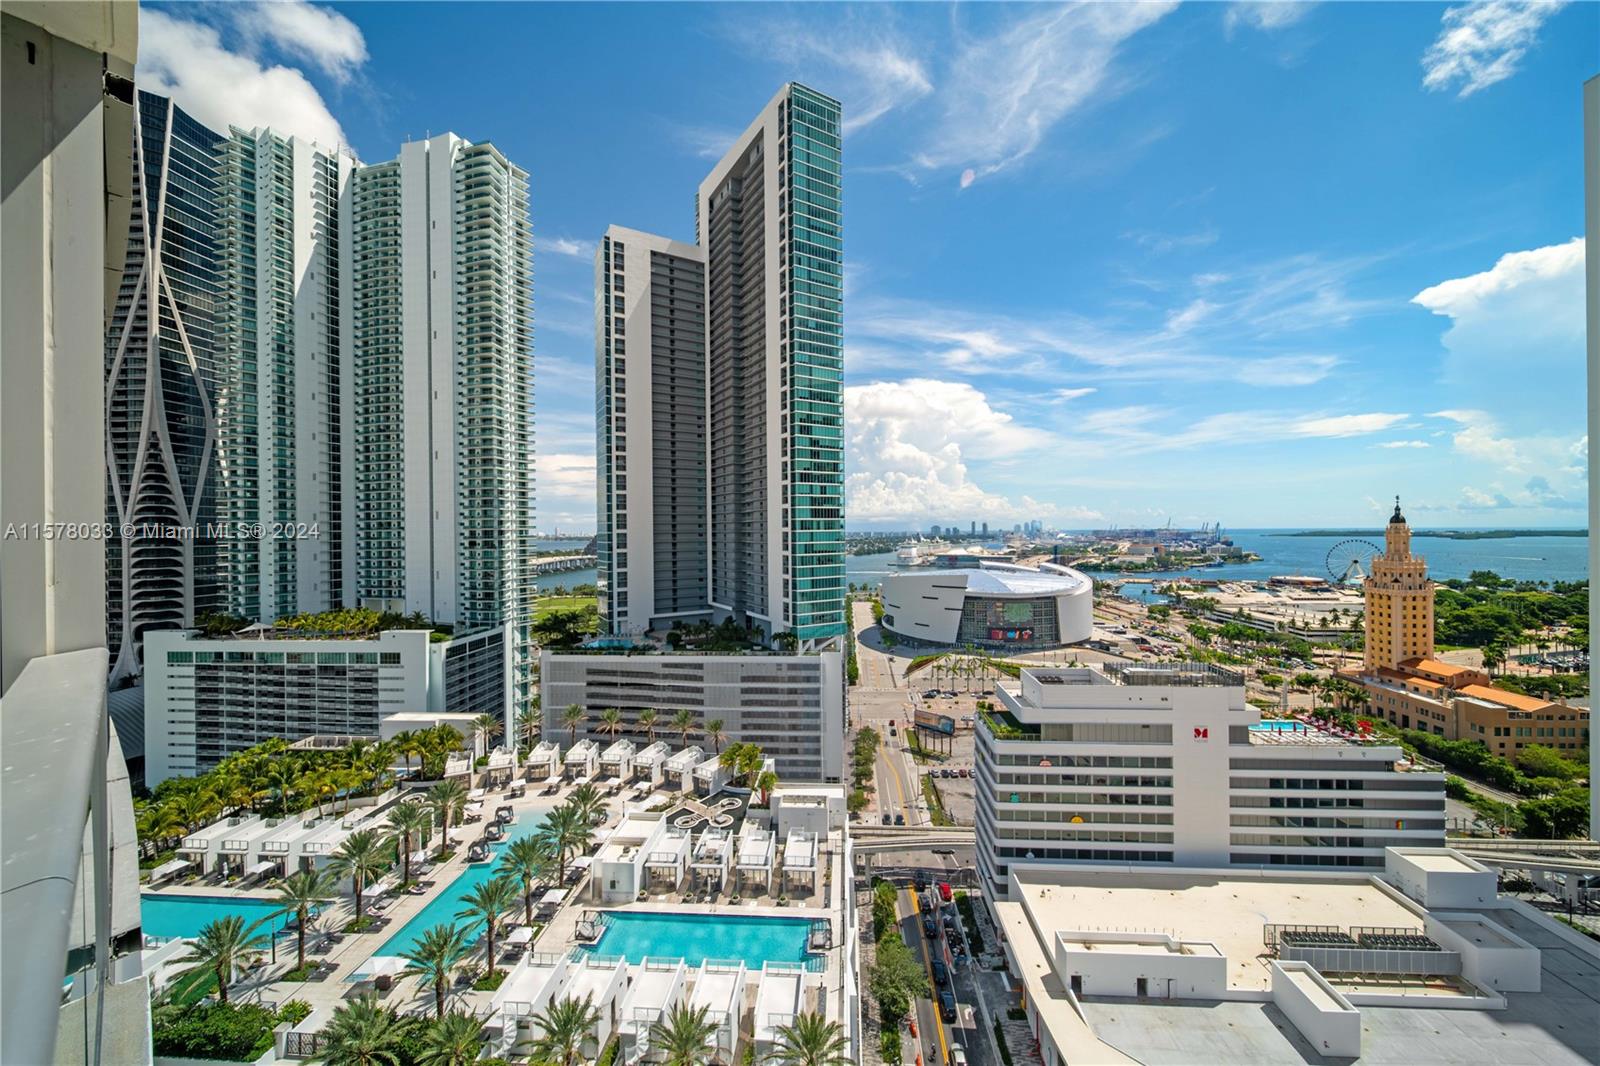 This unit is ideal for families or roommates, besides having spectacular views it has 3beds, large den, and 4 full baths. Every single room has water views. The building itself is perfectly located in the middle of downtown, with easy access to the highways and walking distance from the area, museum park, bayside and Brightline station. The lifestyle coordinator of the building is amazing, there are always activities for everyone to enjoy. The building has the most amenities in the area: tennis courts, soccer field, 5 pools, an observatory in at 55th and 58th floors, gym, game room, mini market, coffee shop, bbq and more.
Fully furnished unit. Min rental period 3 months, yearly rentals accepted. Only first month & deposit needed to move in. Bi-weekly housekeeping is included in the price.